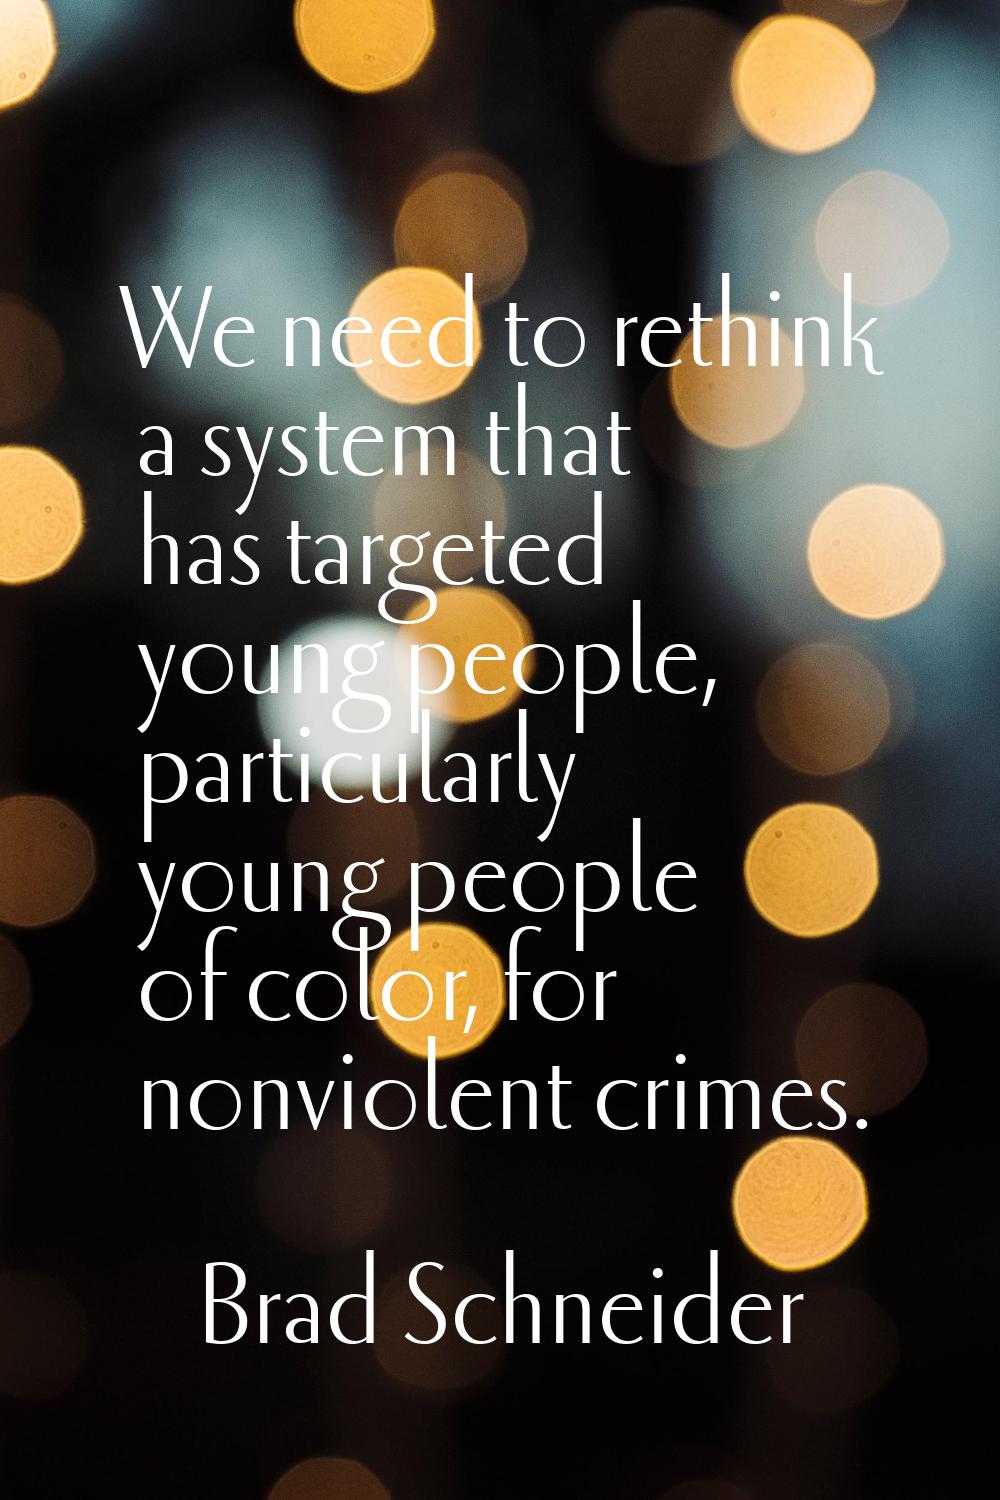 We need to rethink a system that has targeted young people, particularly young people of color, for